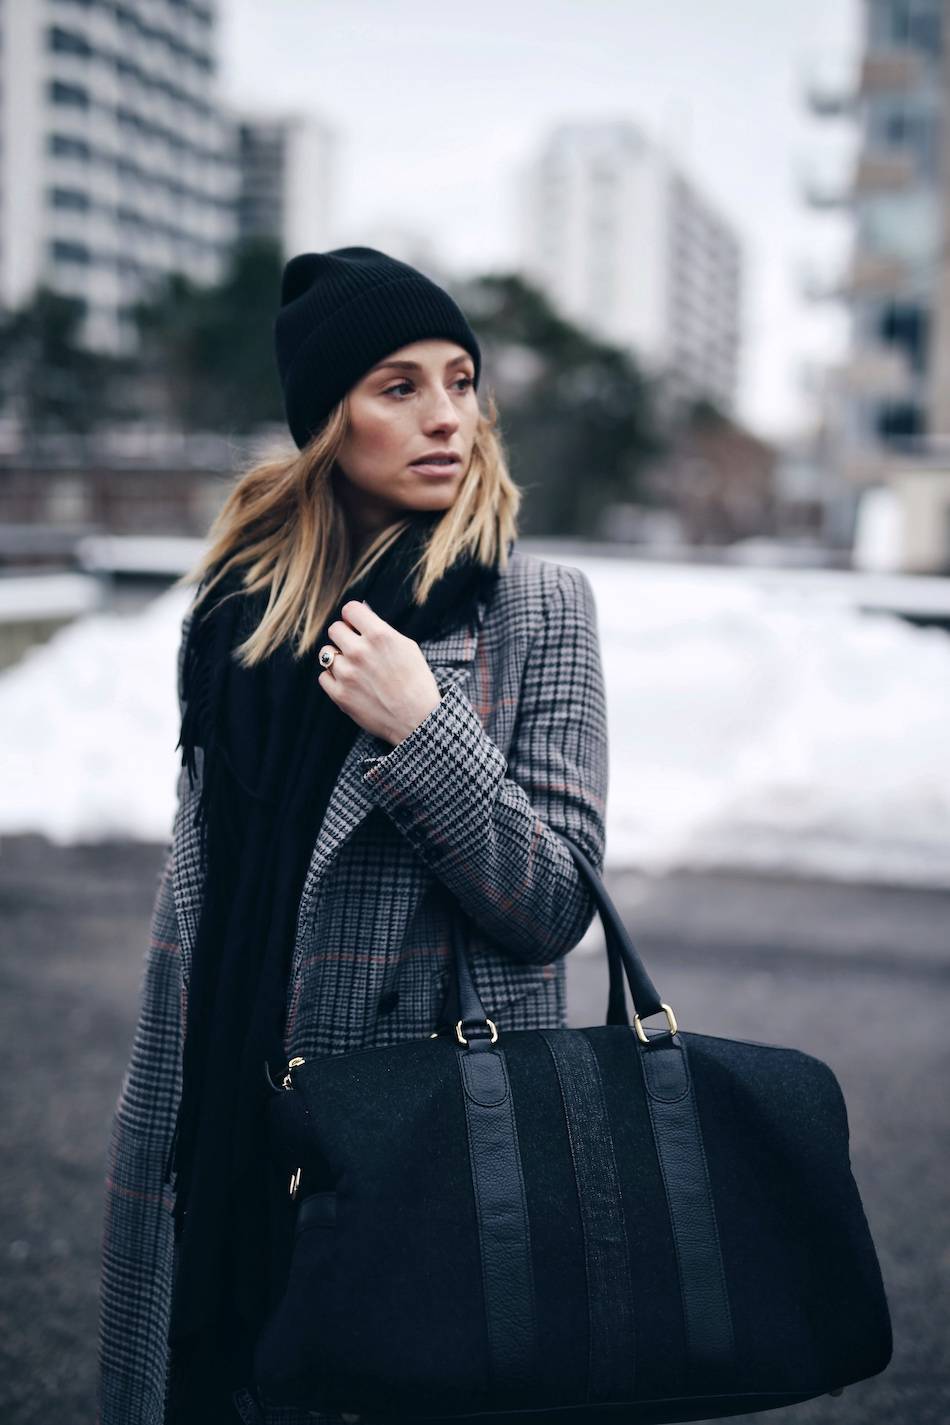 style-travel-blogger-jill-lansky-of-the-august-diaries-9-gifts-for-everyone-on-your-list-travel-bag-and-toque-plaid-coat